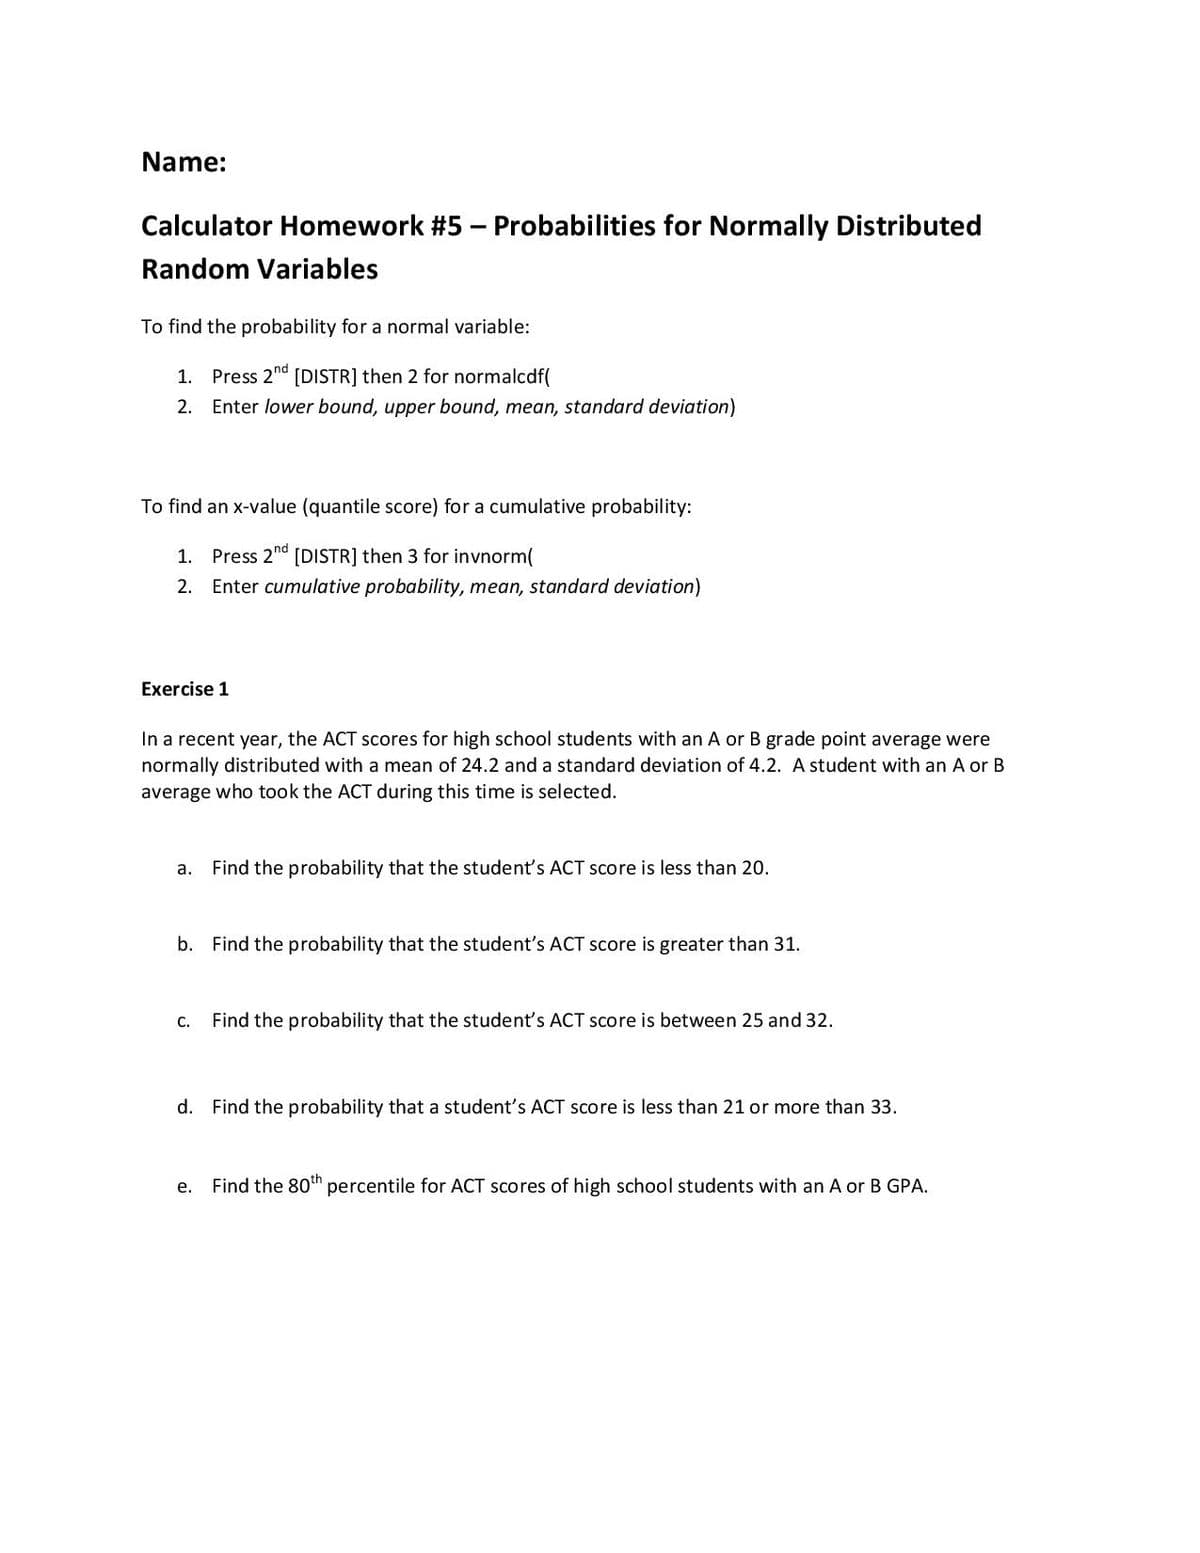 Name:
Calculator Homework #5 – Probabilities for Normally Distributed
Random Variables
To find the probability for a normal variable:
1. Press 2nd [DISTR] then 2 for normalcdf(
2. Enter lower bound, upper bound, mean, standard deviation)
To find an x-value (quantile score) for a cumulative probability:
1. Press 2nd [DISTR] then 3 for invnorm(
2. Enter cumulative probability, mean, standard deviation)
Exercise 1
In a recent year, the ACT scores for high school students with an A or B grade point average were
normally distributed with a mean of 24.2 and a standard deviation of 4.2. A student with an A or B
average who took the ACT during this time is selected.
а.
Find the probability that the student's ACT score is less than 20.
b. Find the probability that the student's ACT score is greater than 31.
С.
Find the probability that the student's ACT score is between 25 and 32.
d. Find the probability that a student's ACT score is less than 21 or more than 33.
е.
Find the 80th percentile for ACT scores of high school students with an A or B GPA.
